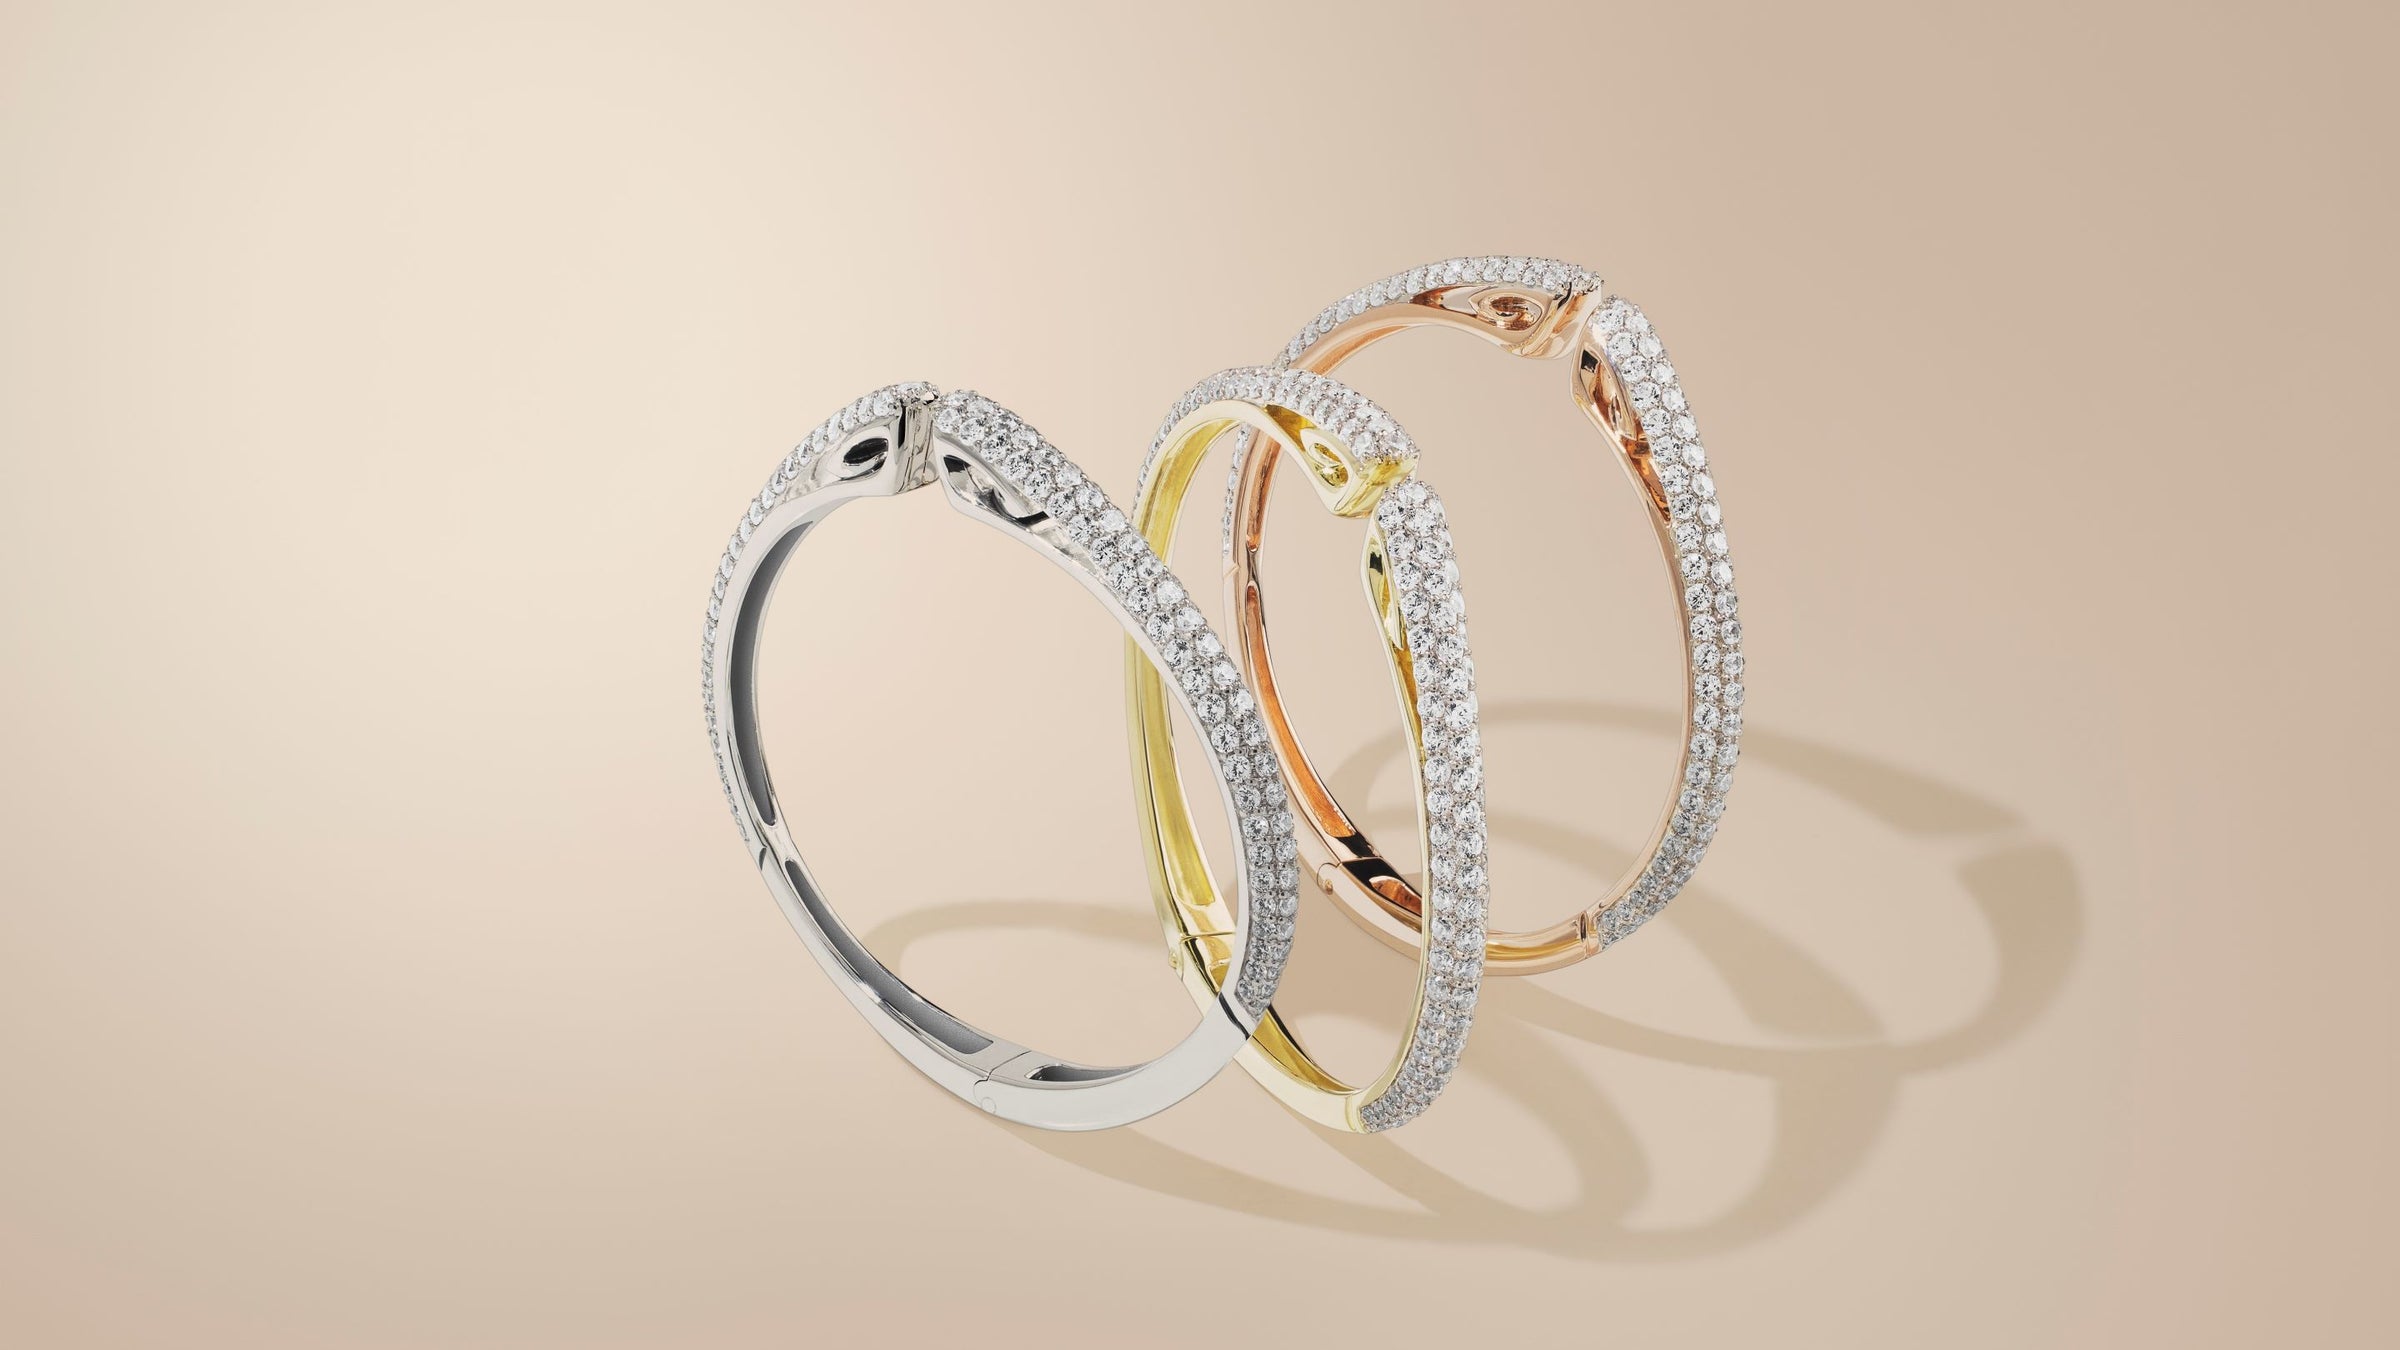 Trio of sparkling cuffs in sterling silver, 18K Gold Vermeil and 18K Rose Gold Vermeil accented with white CZ stones